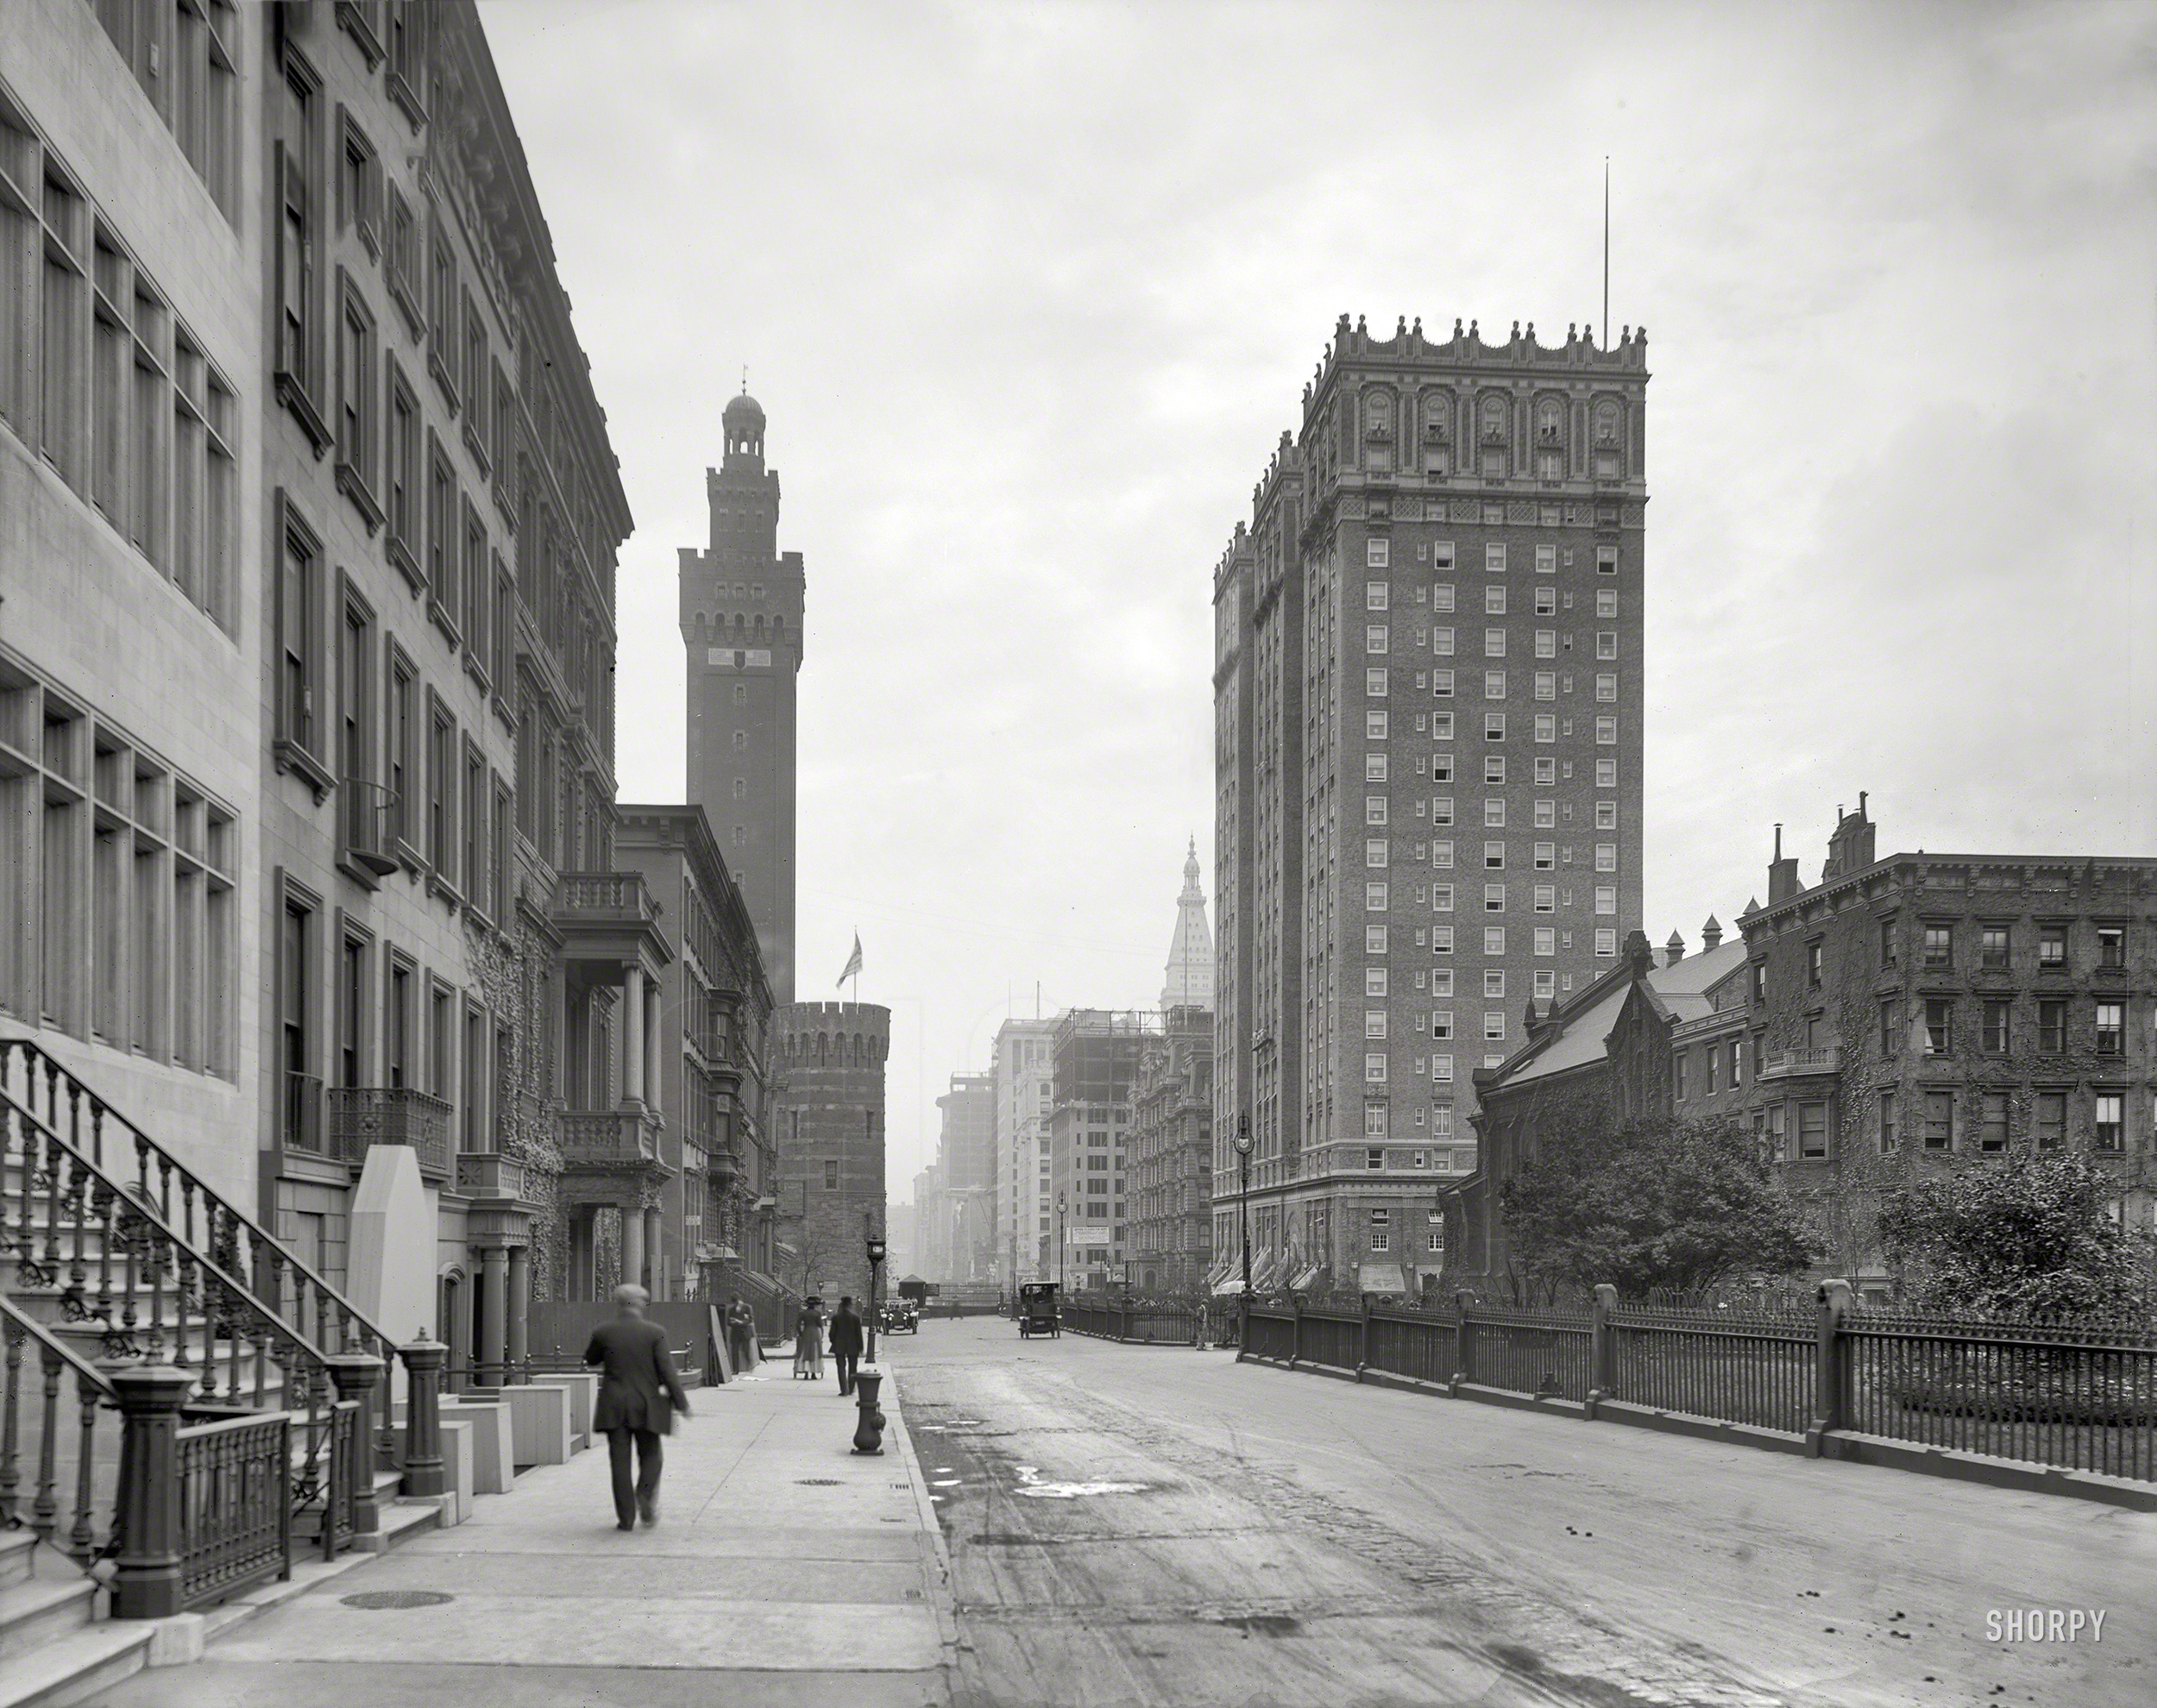 New York circa 1913. "Park Avenue and Vanderbilt Hotel, south from 36th Street." 8x10 inch dry plate glass negative, Detroit Publishing Company. View full size.